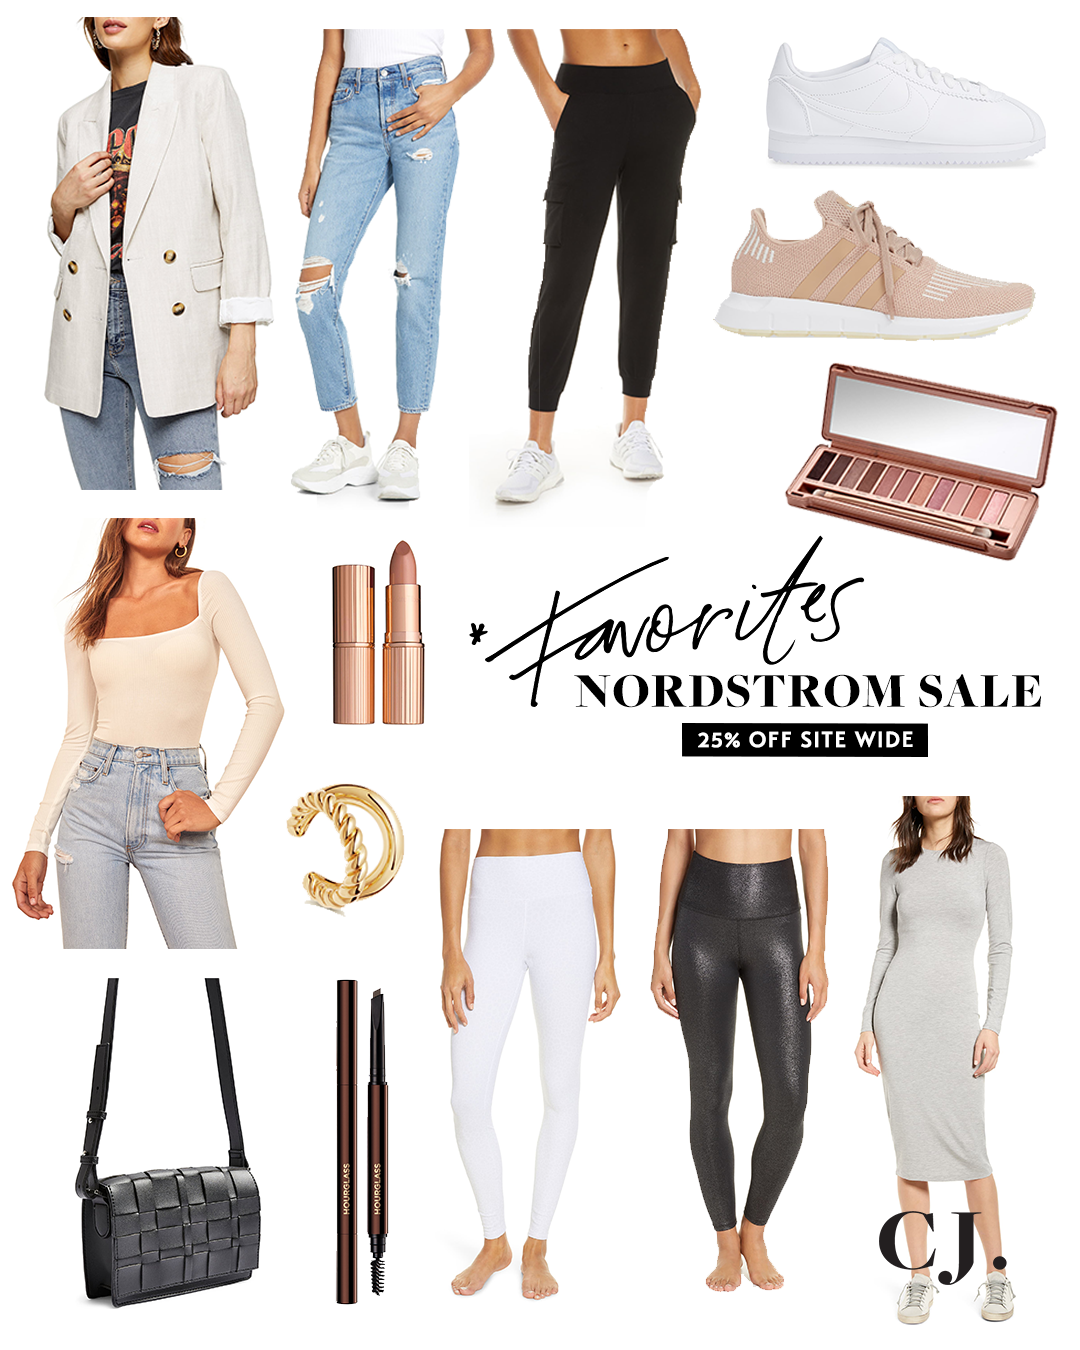 What to Shop from the Nordstrom Sale